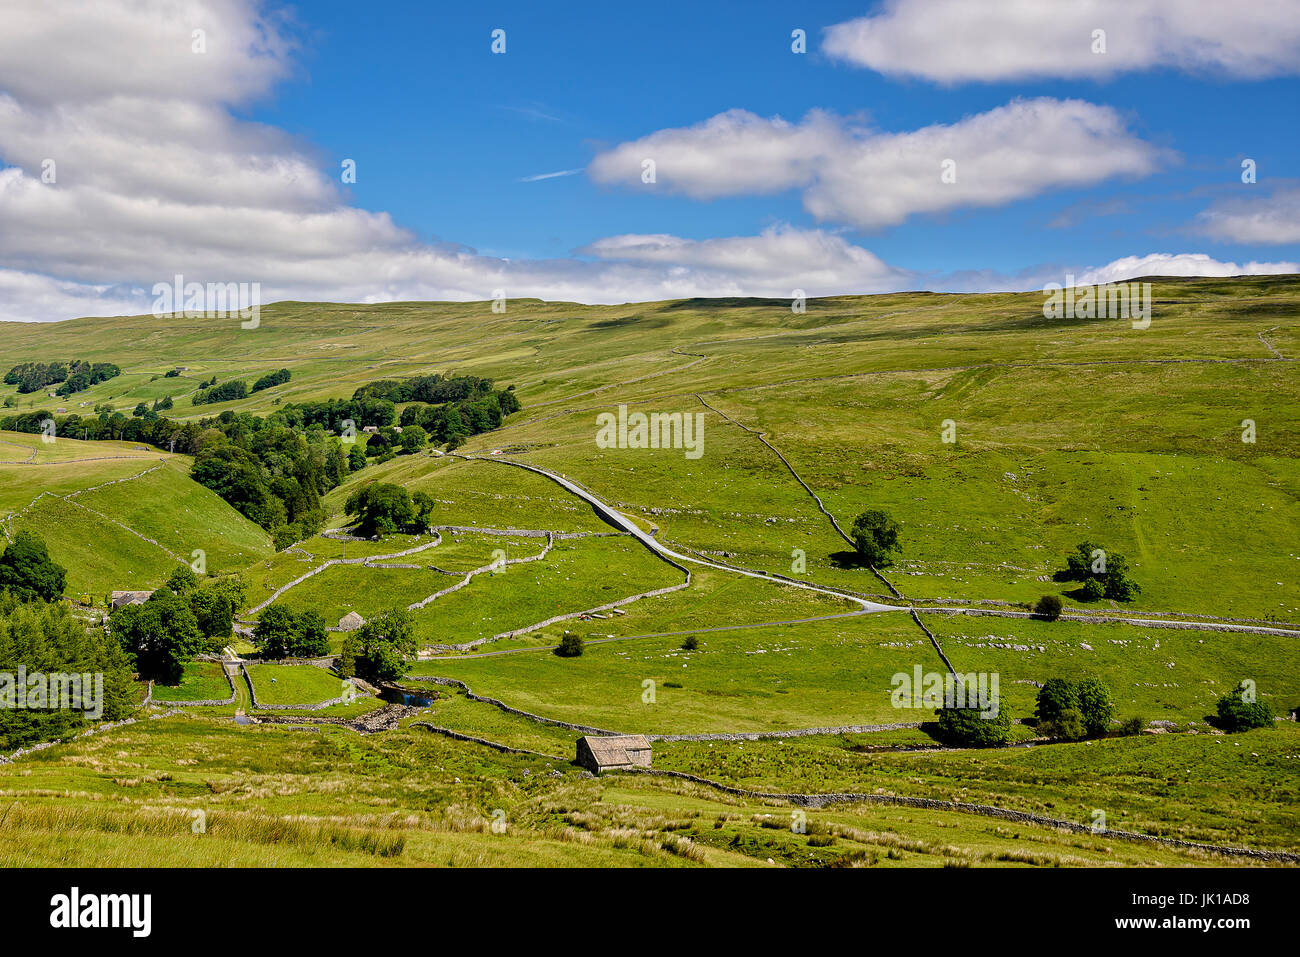 Typical Yorkshire Dales view in Upper Wharfedale Stock Photo